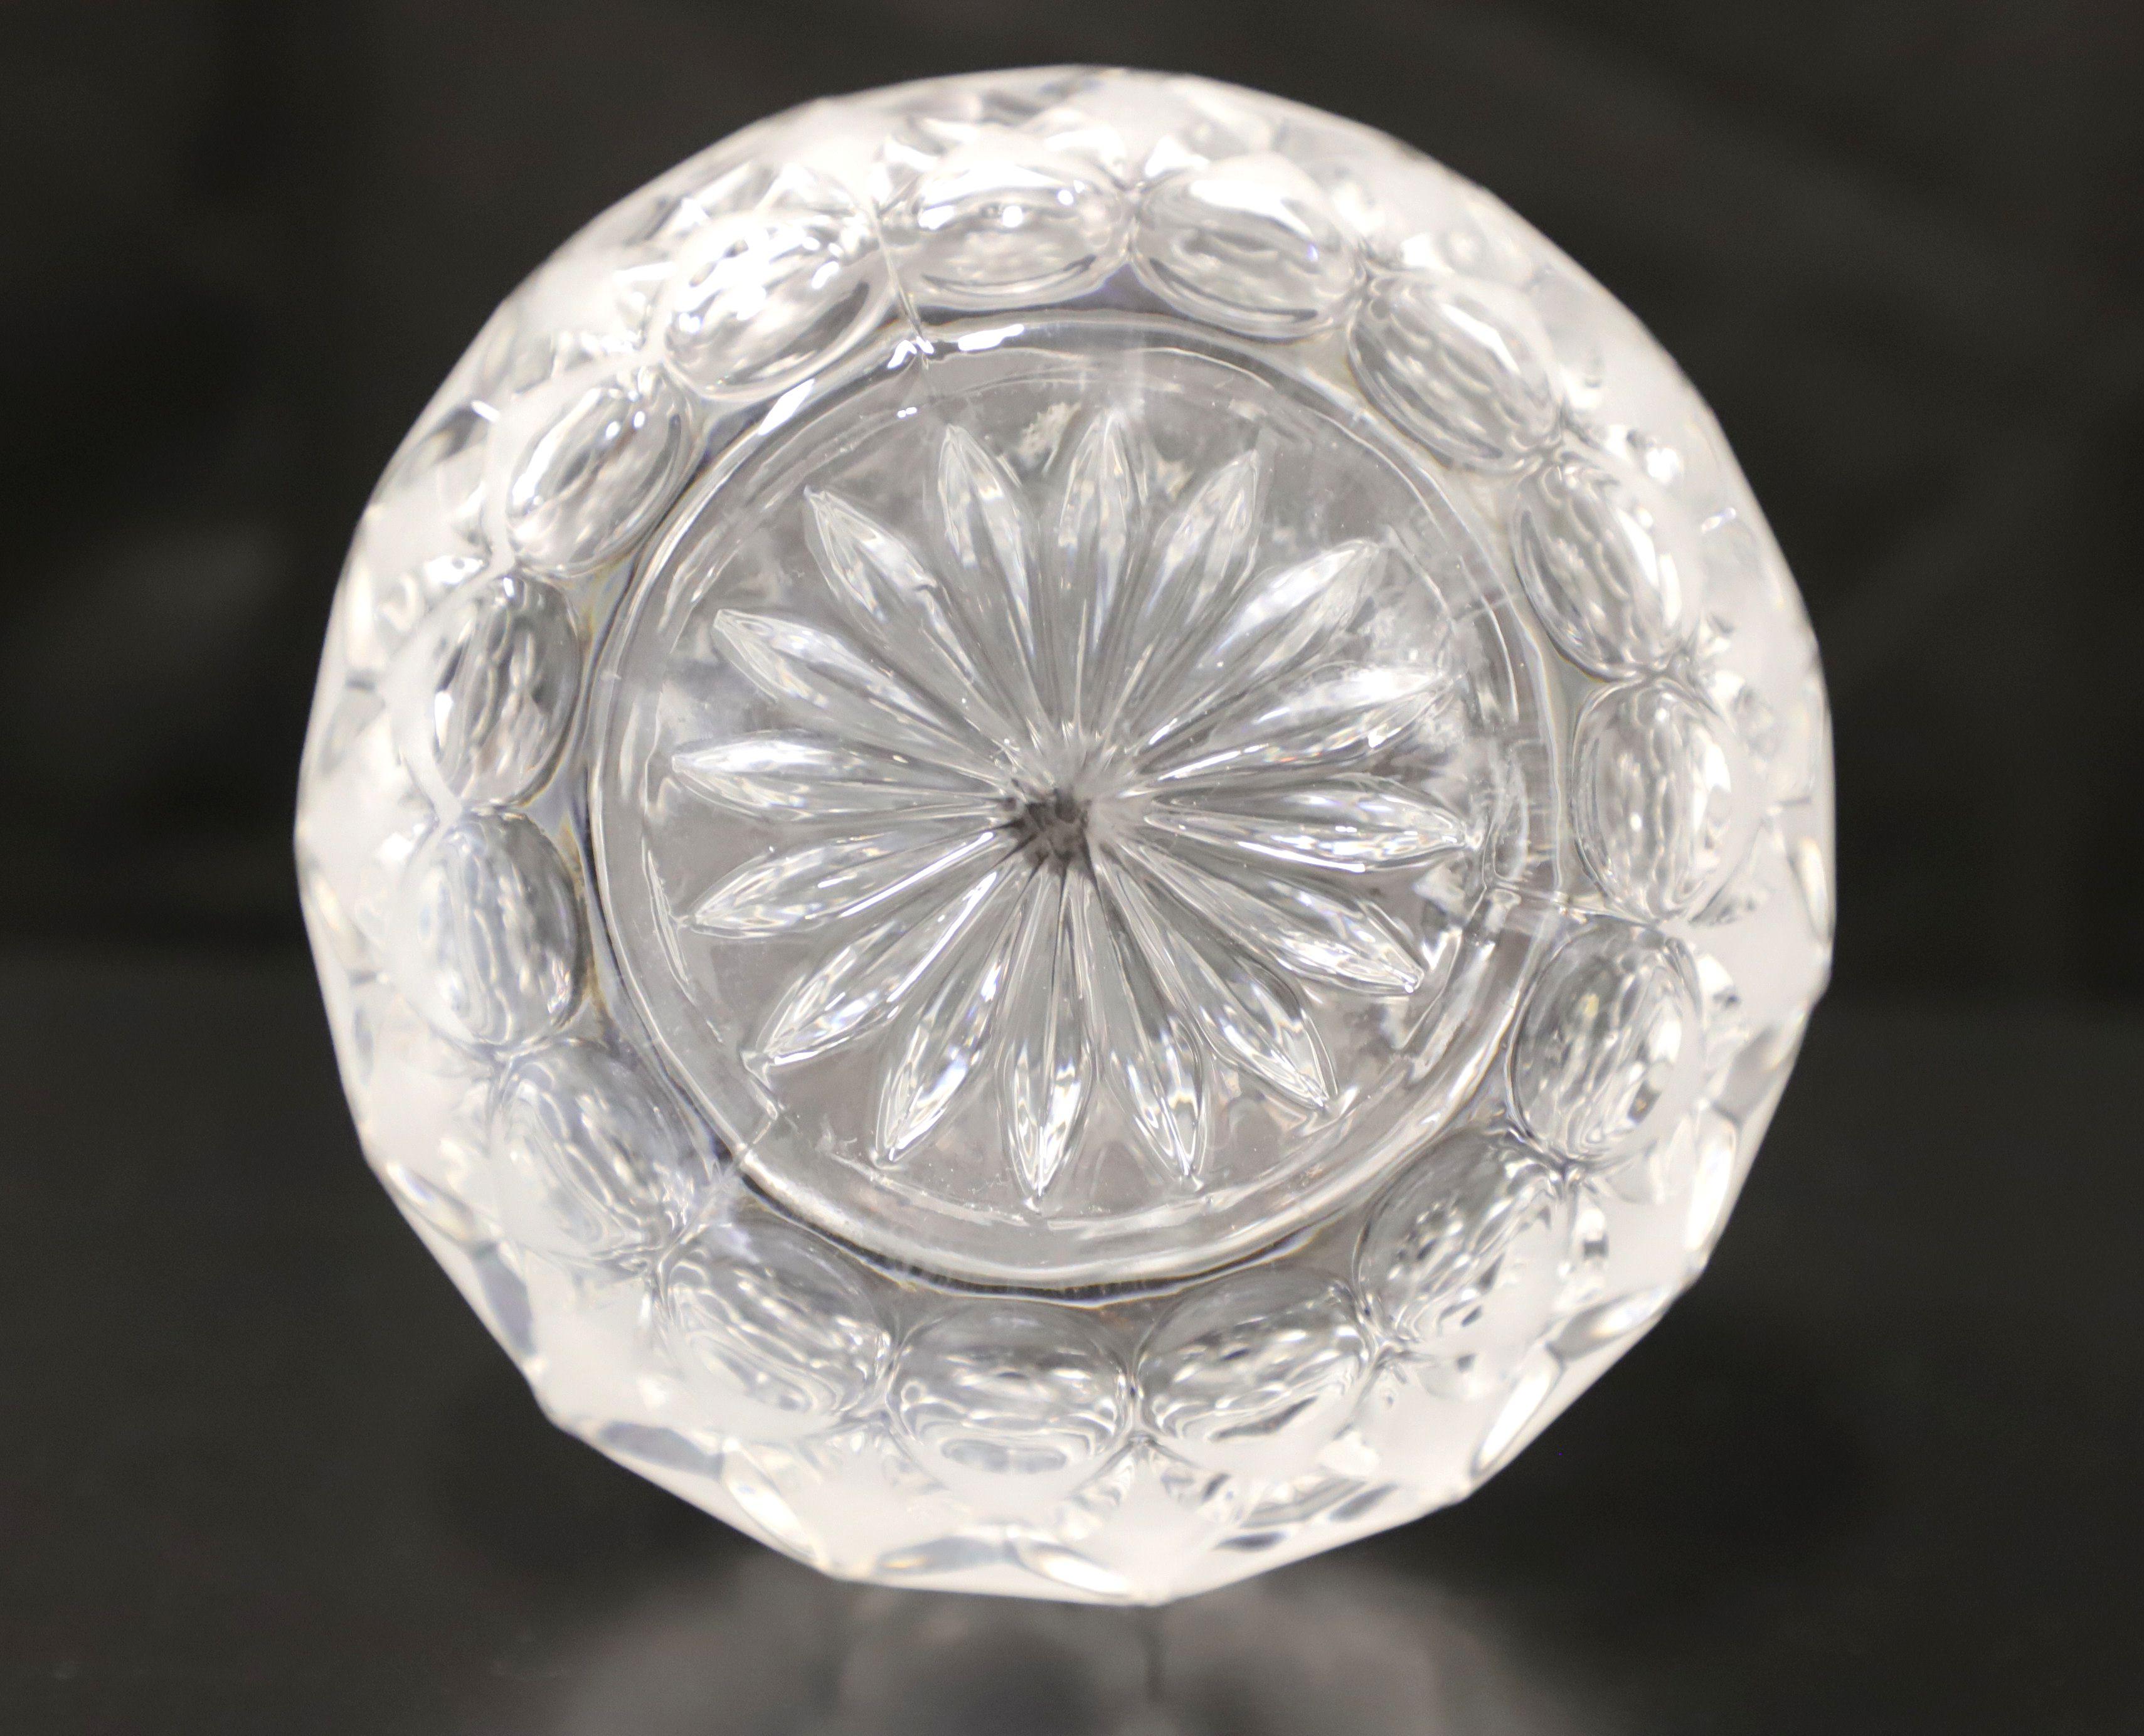 Mid 20th Century Crystal Decanter - A 3